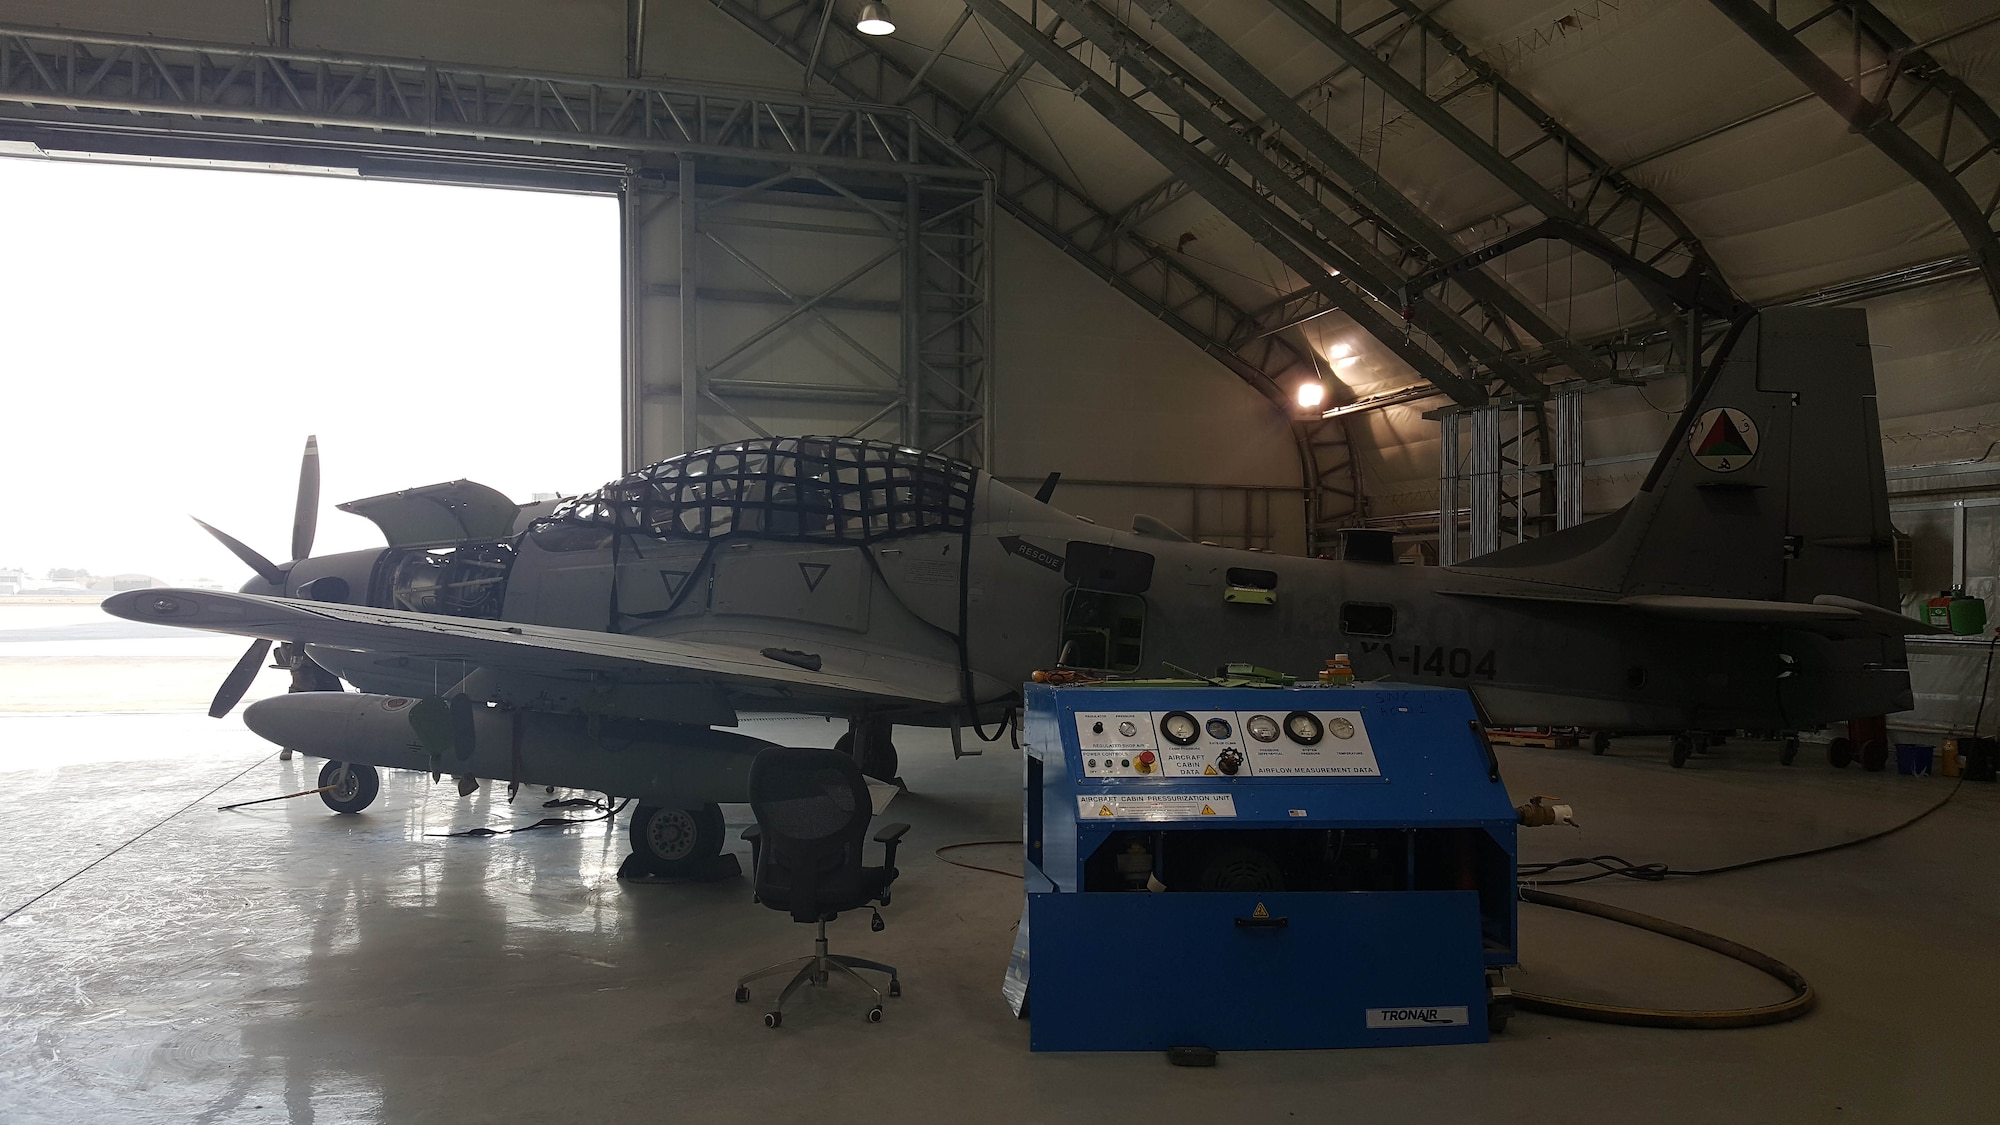 An A-29 Super Tucano sits inside a hangar at Hamid Karzai International Airport, Kabul, Afghanistan, November 19, 2016, while undergoing an inspection. Afghan Air Force maintainers have completed the first 600-hour aircraft inspection on the airframe in country. The inspection included an in-depth look at all parts of the plane to include flight controls, landing gear and avionics packages. (U.S. Air Force photo by Tech. Sgt. Jeffery Marino)